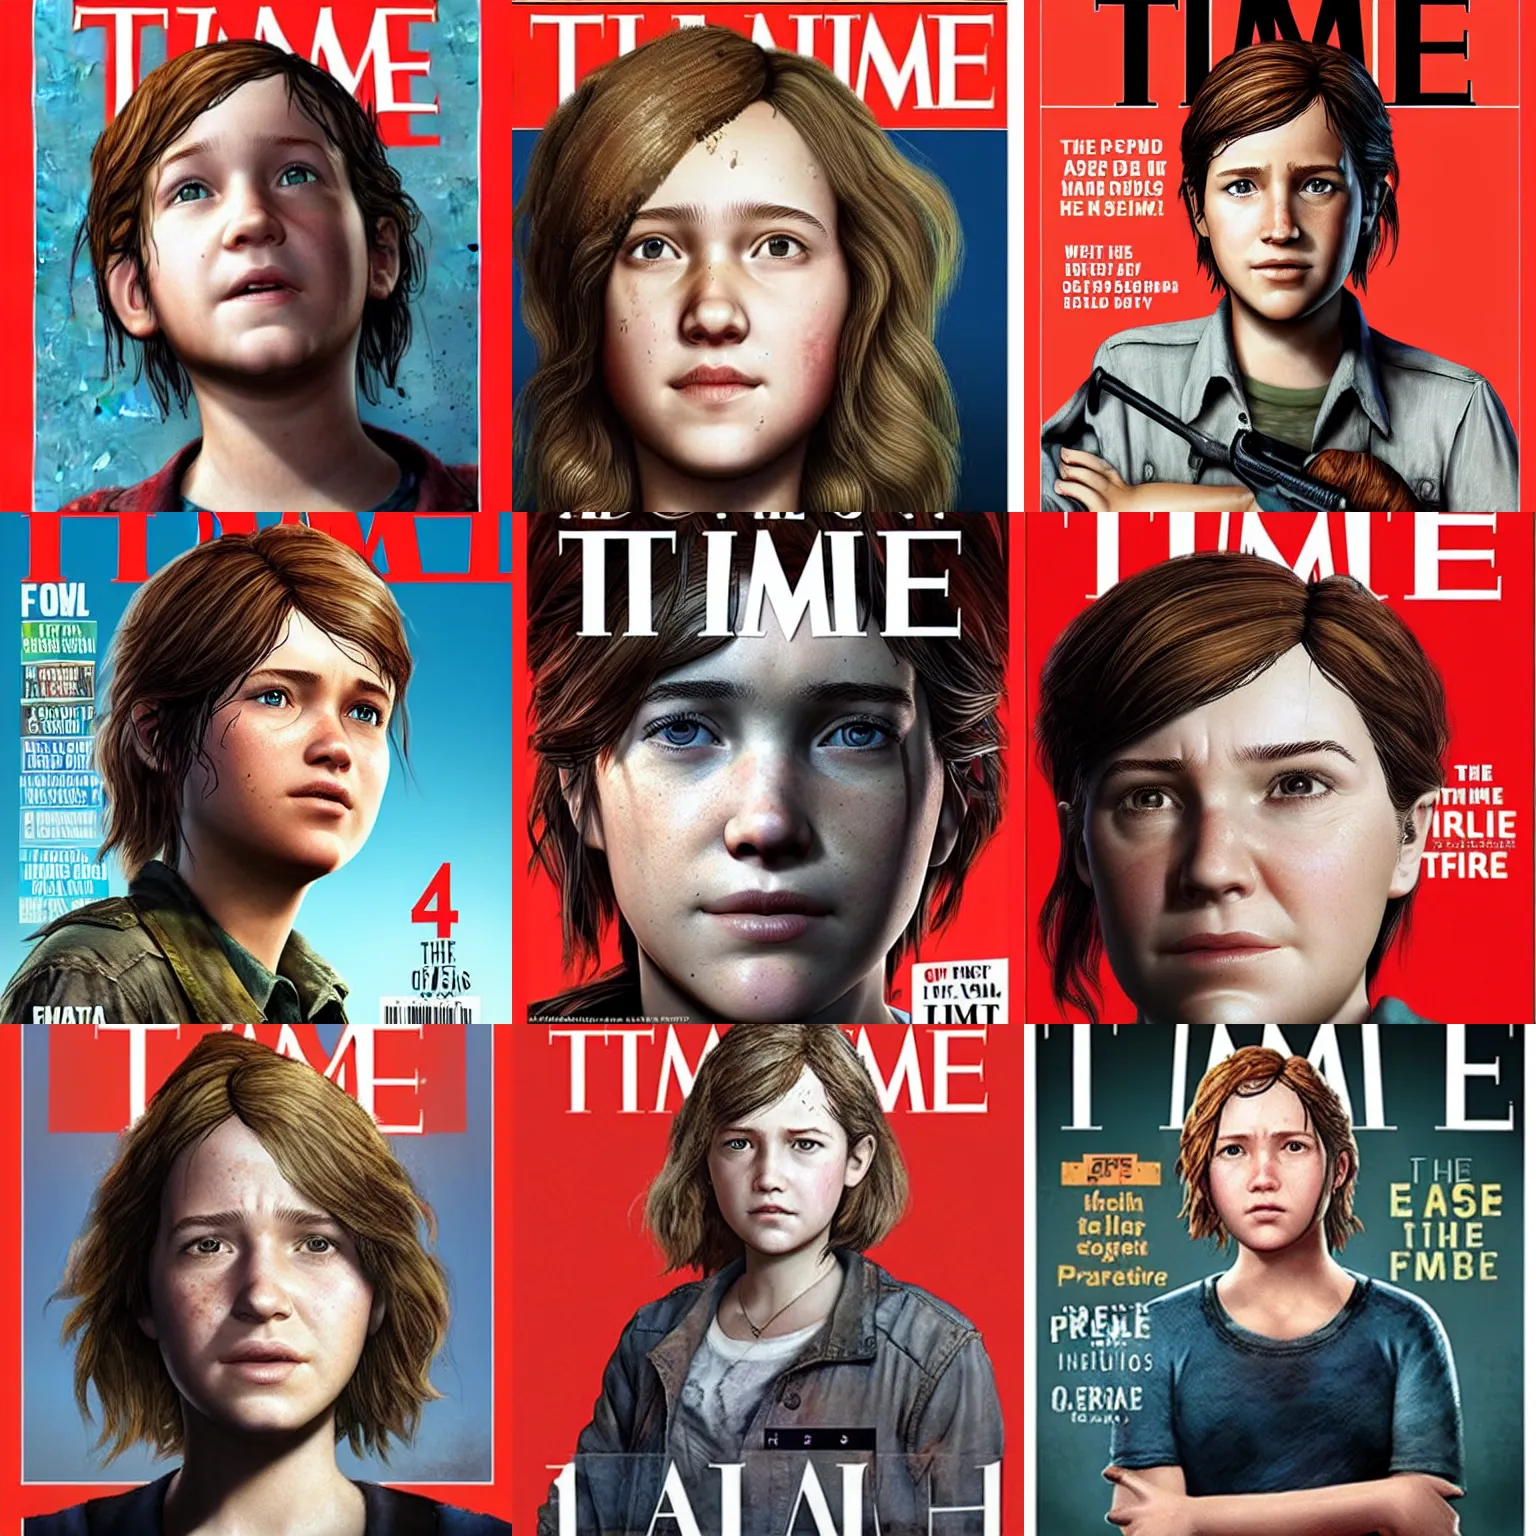 Prompt: 47th president of the United States Ellie (The Last of Us), on the cover of Time Magazine